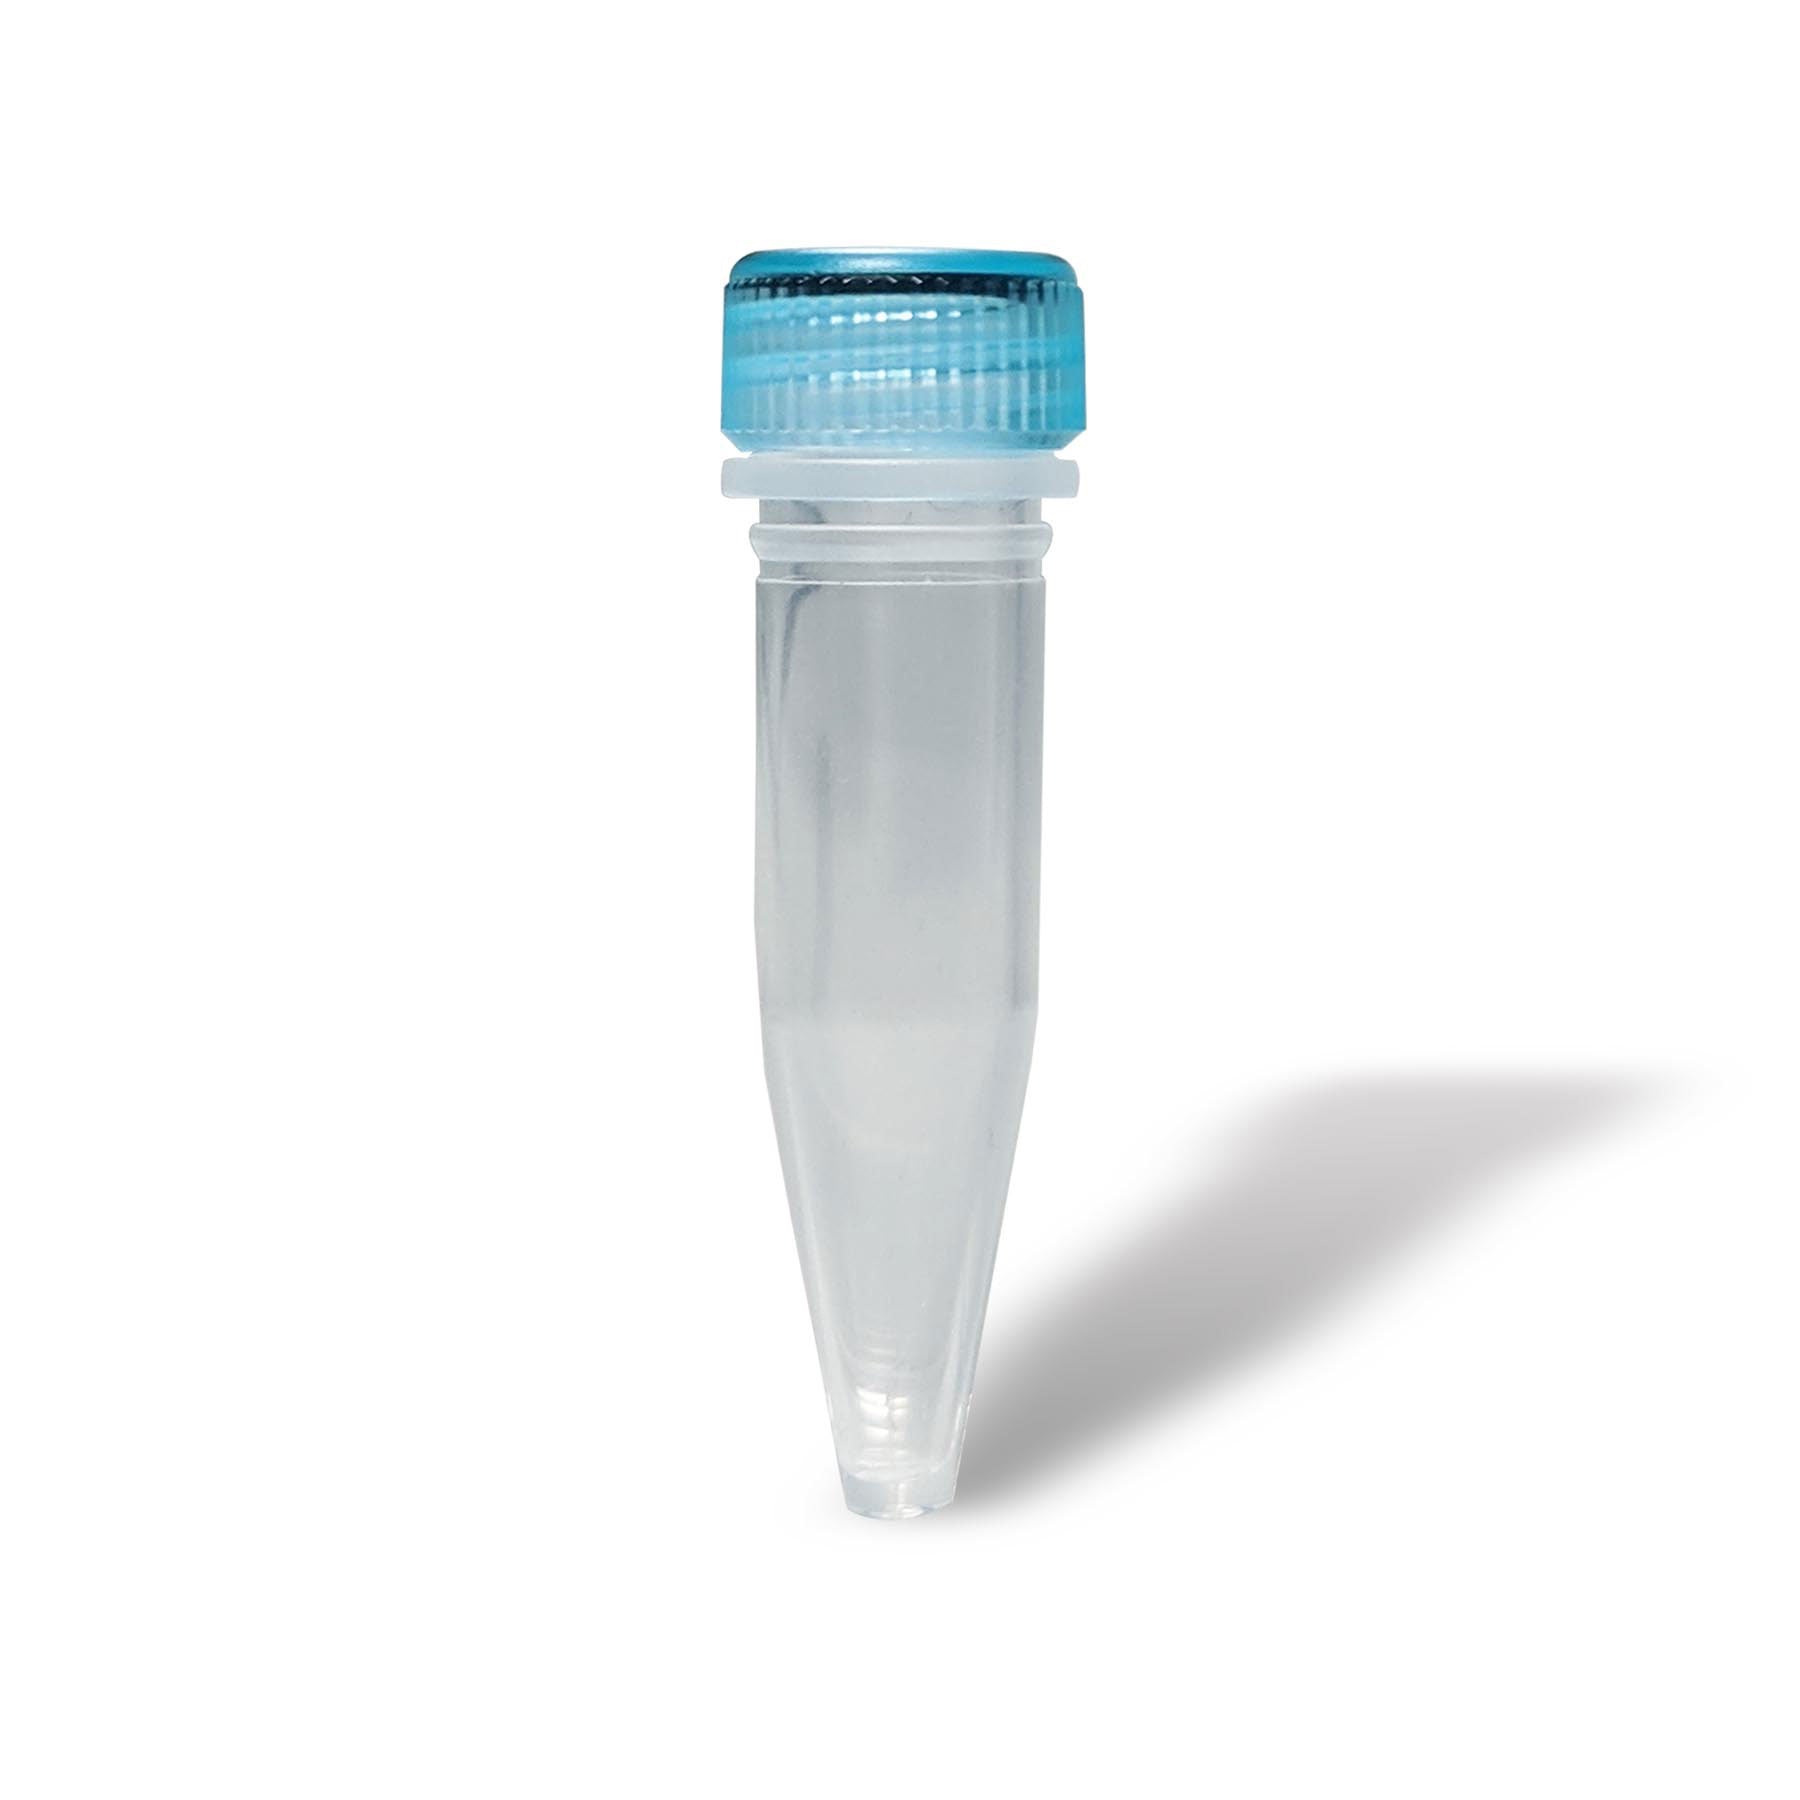 MTC Bio C3215-CG, Clearseal Microcentrifuge Tube, 1.5ml, Sterile, Non-Graduated, Conical Bottom, 20 Resealable Bags of 50 Tubes, 1000/cs